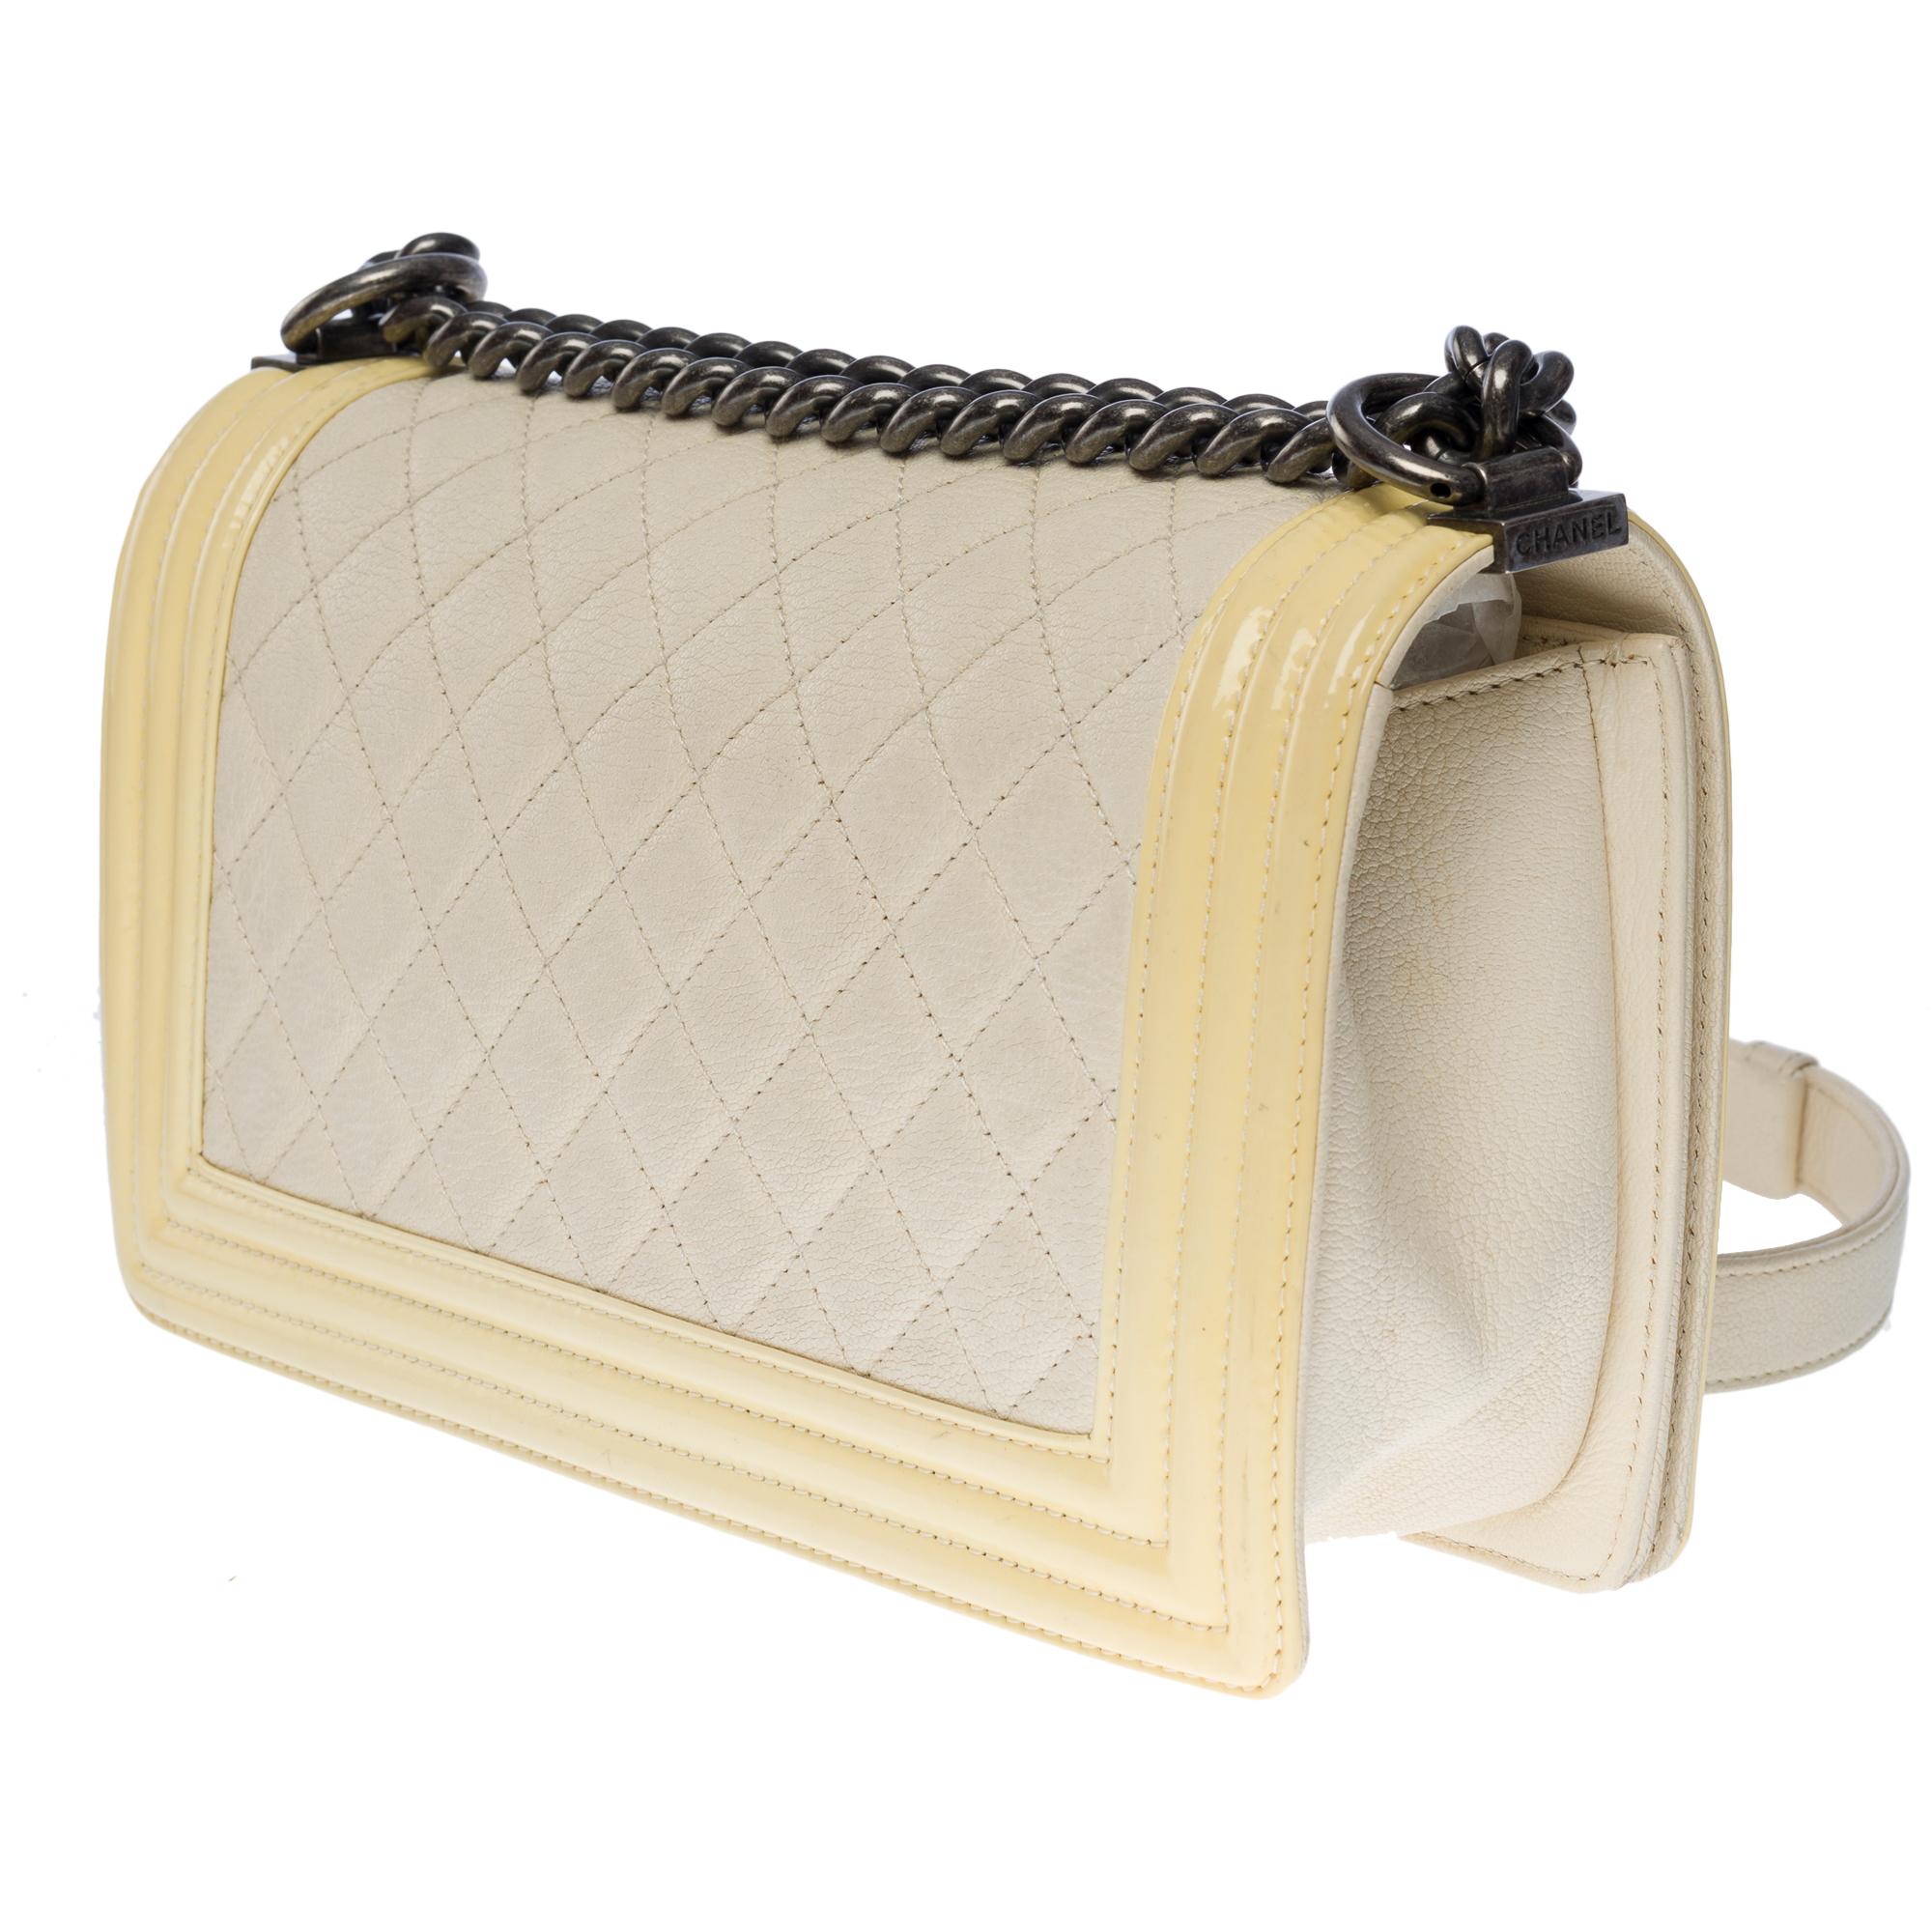 Chanel Boy medium shoulder bag in beige caviar & Yellow patent leather, SHW For Sale 1